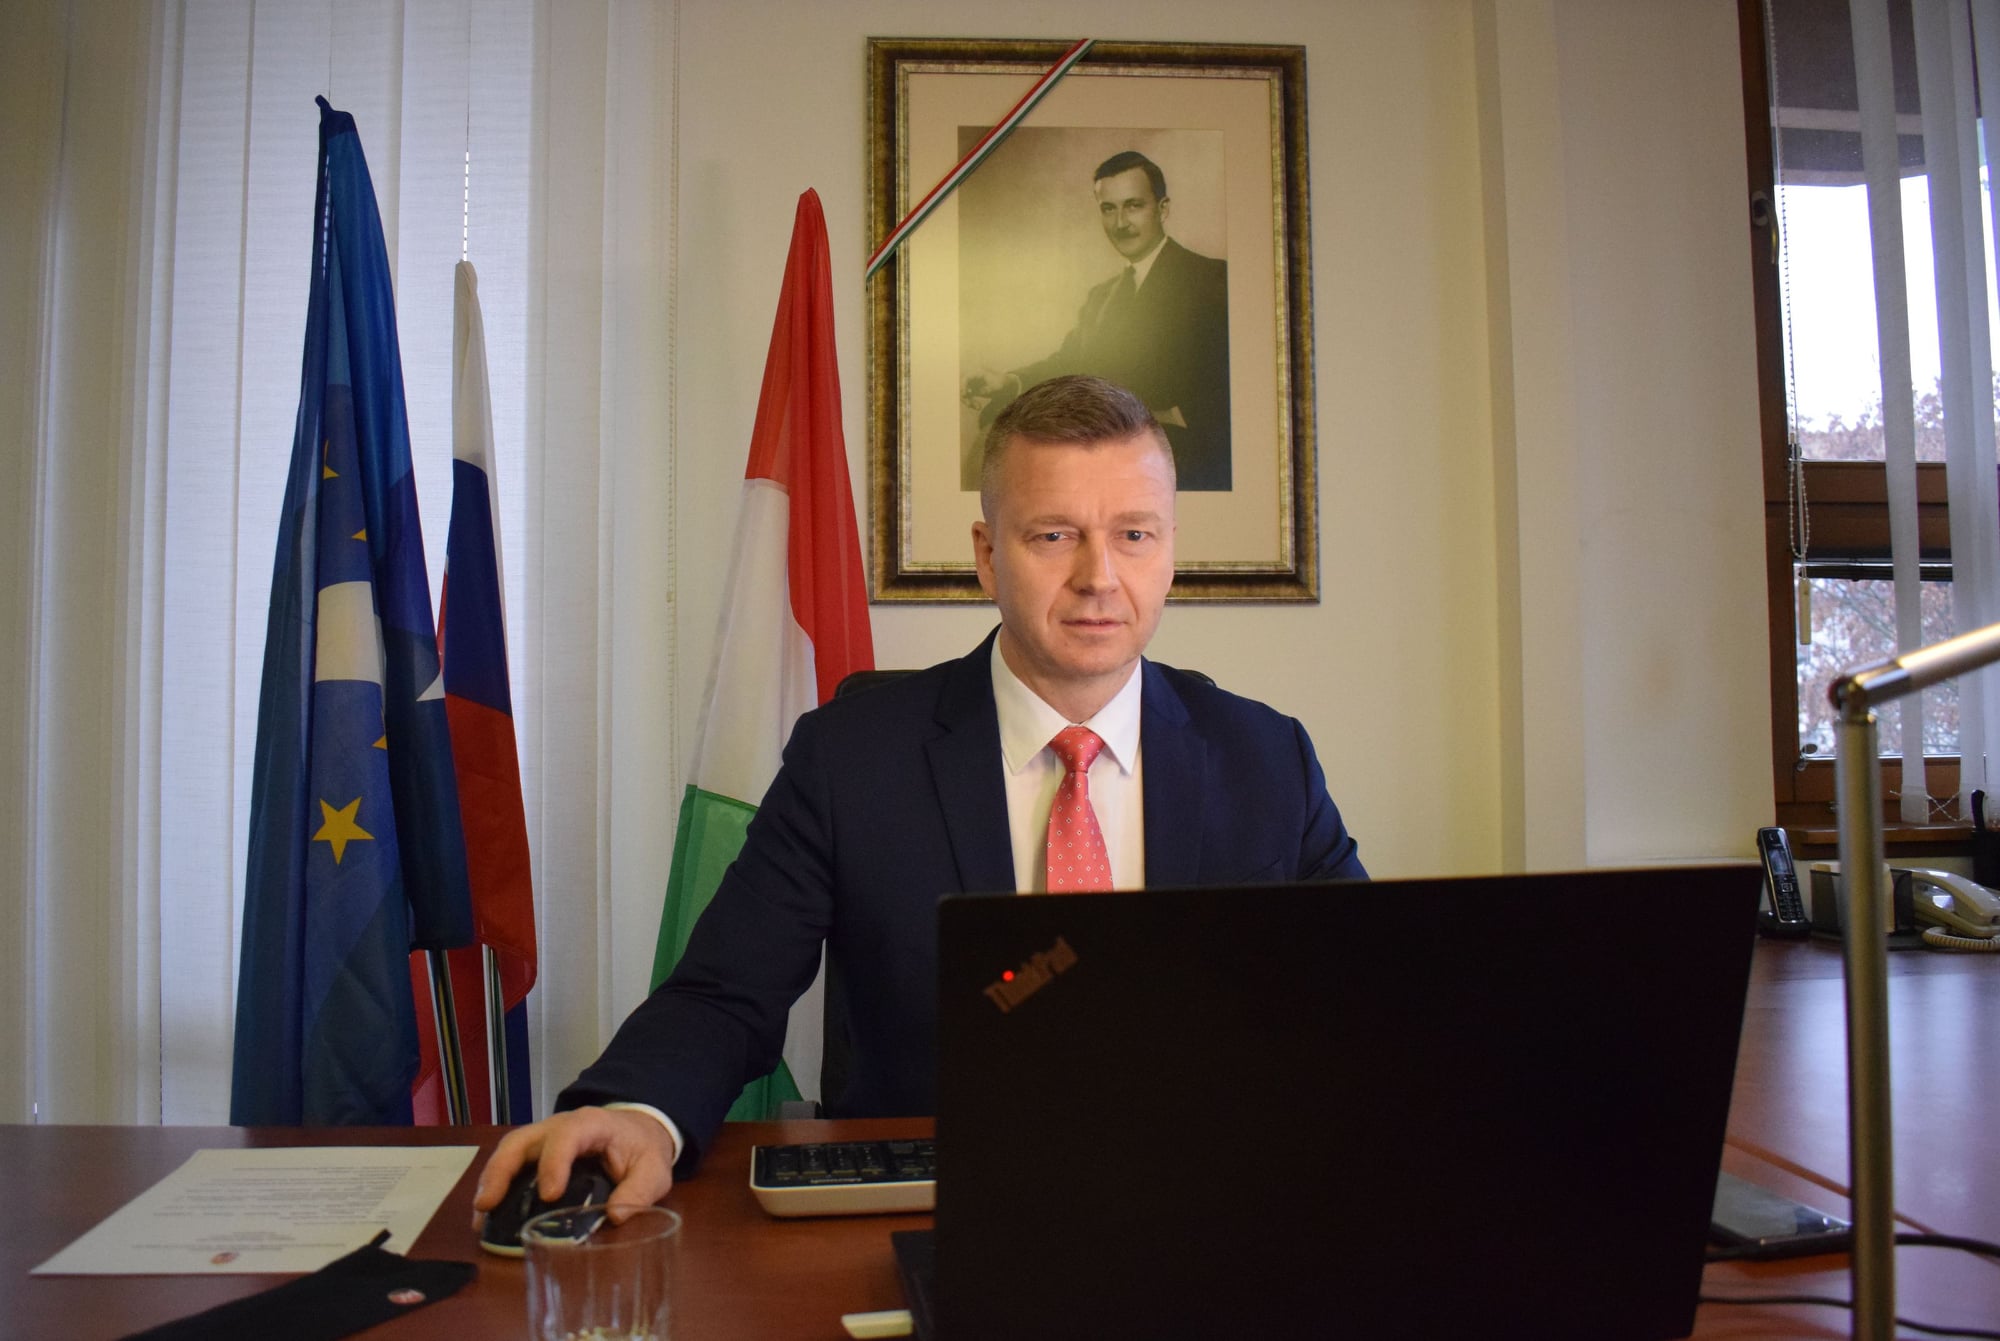 Leader of Slovakian Hungarian Alliance Reflects on Presidential Election